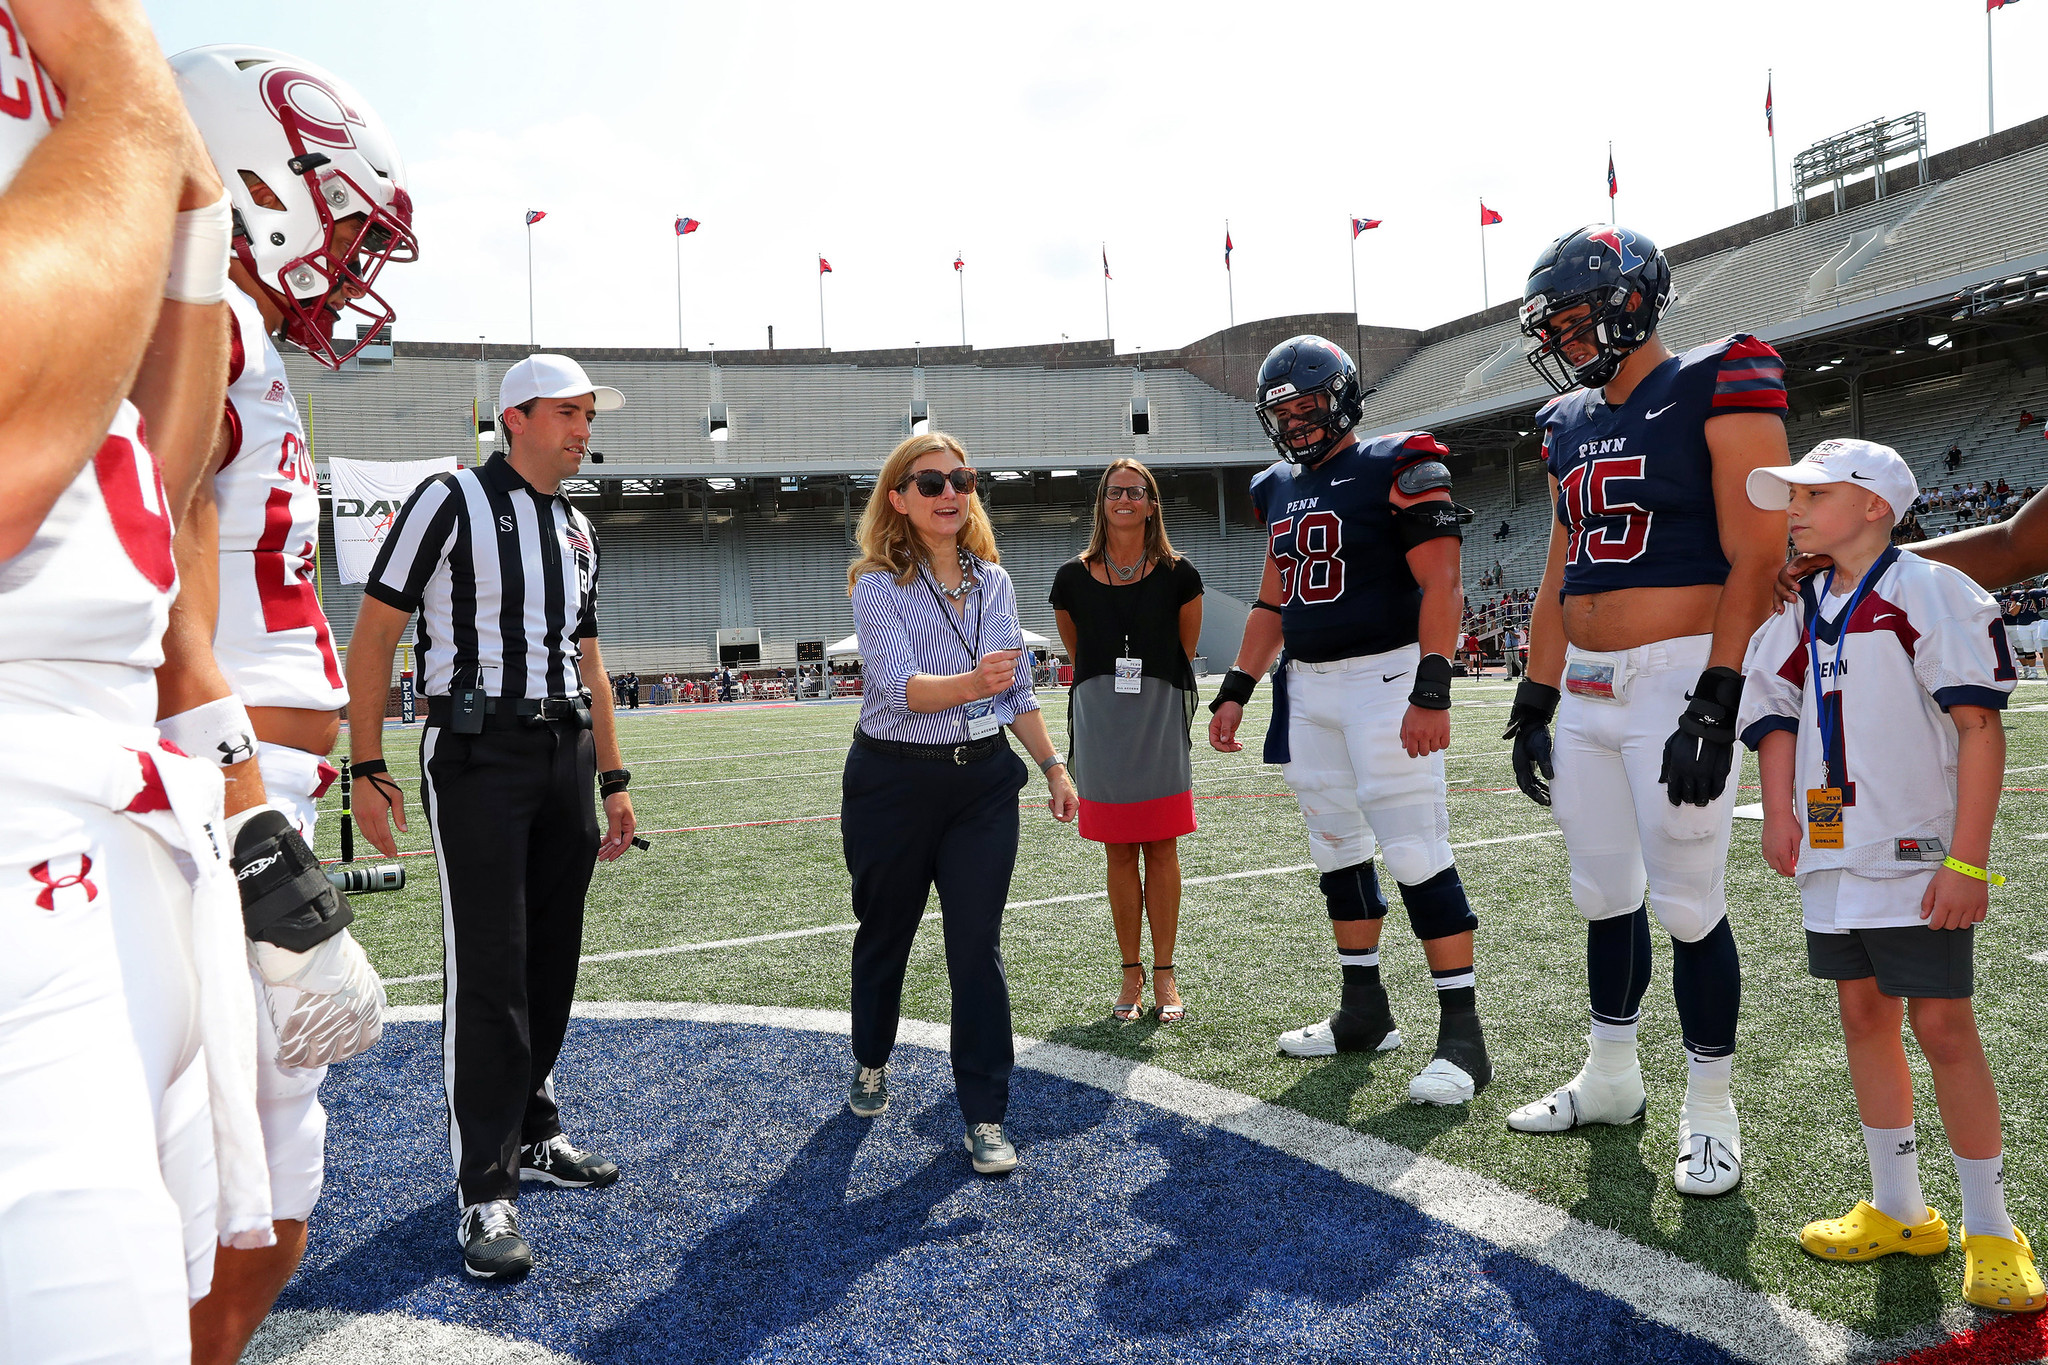 Liz Magill tossing a coin at the start of a football game on the field.